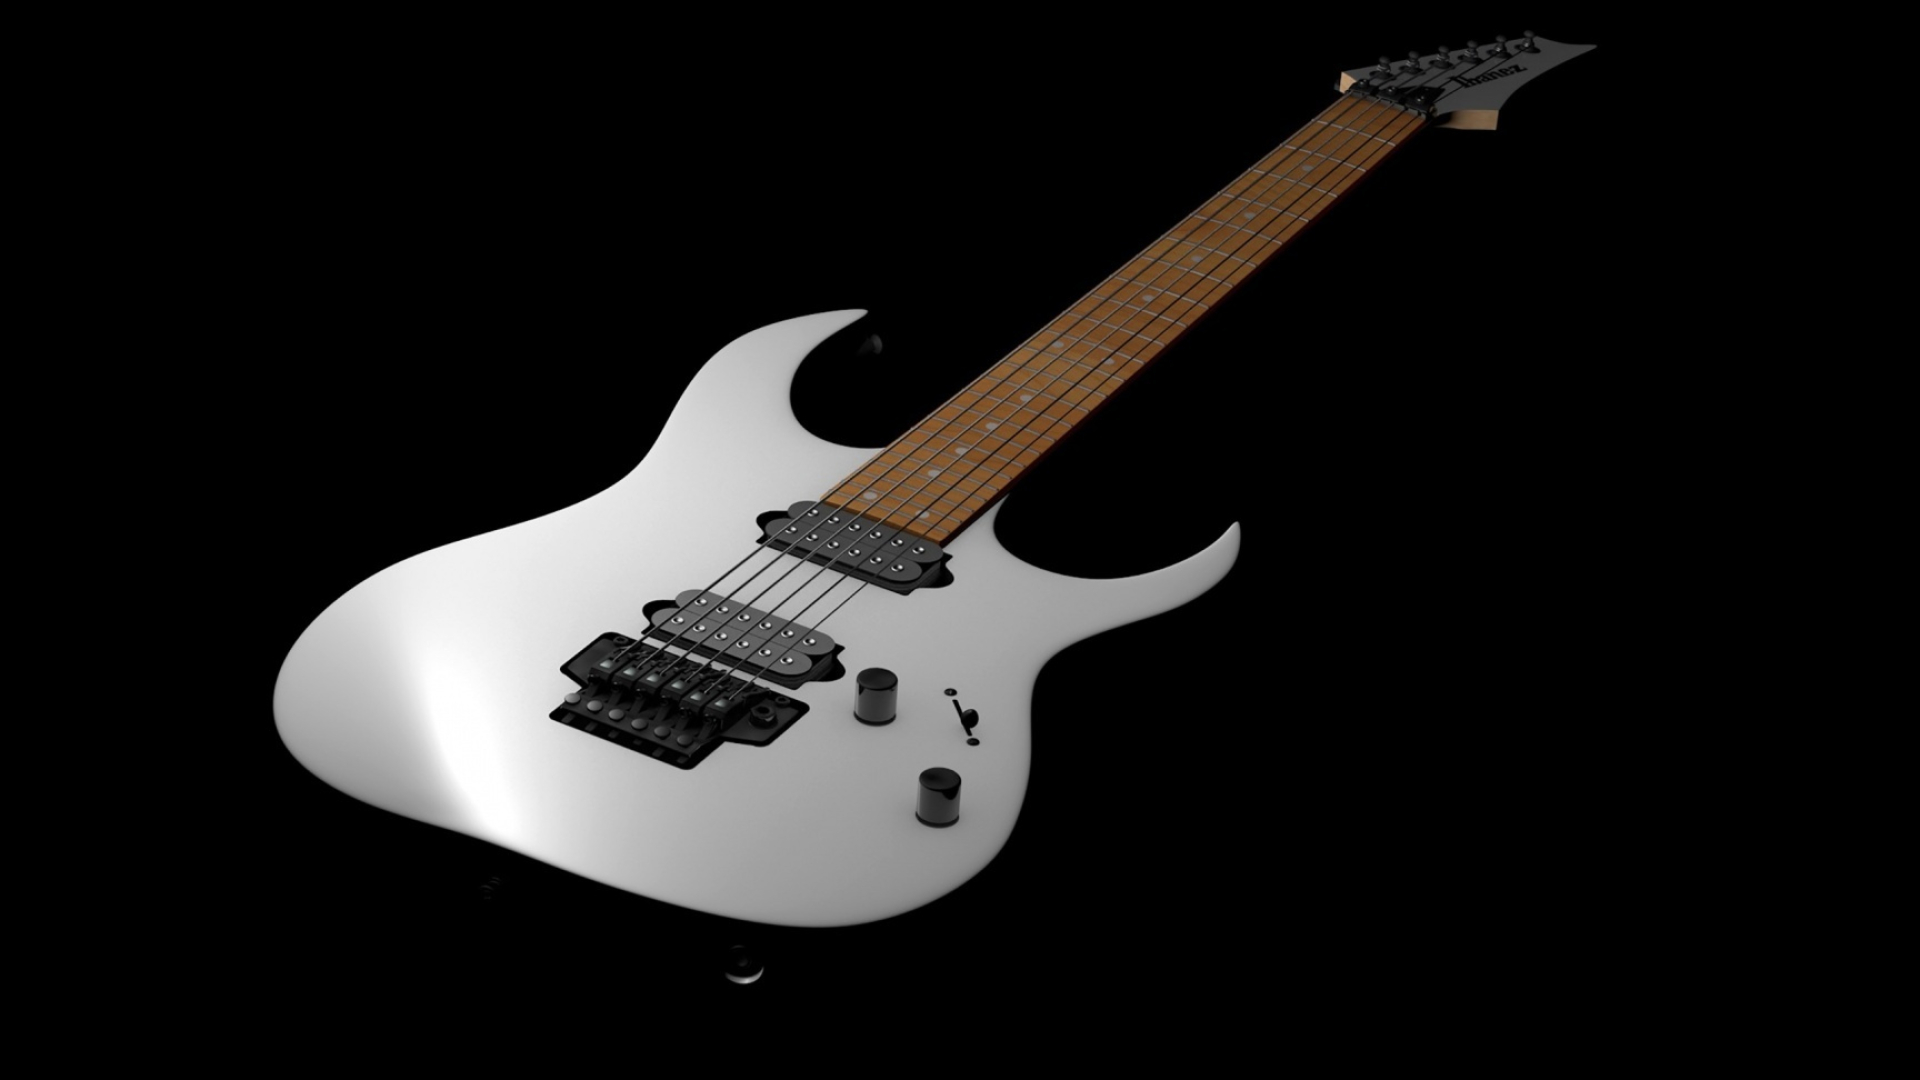 Ibanez electric guitar, White-colored design, High-resolution wallpaper, Aesthetic beauty, 1920x1080 Full HD Desktop